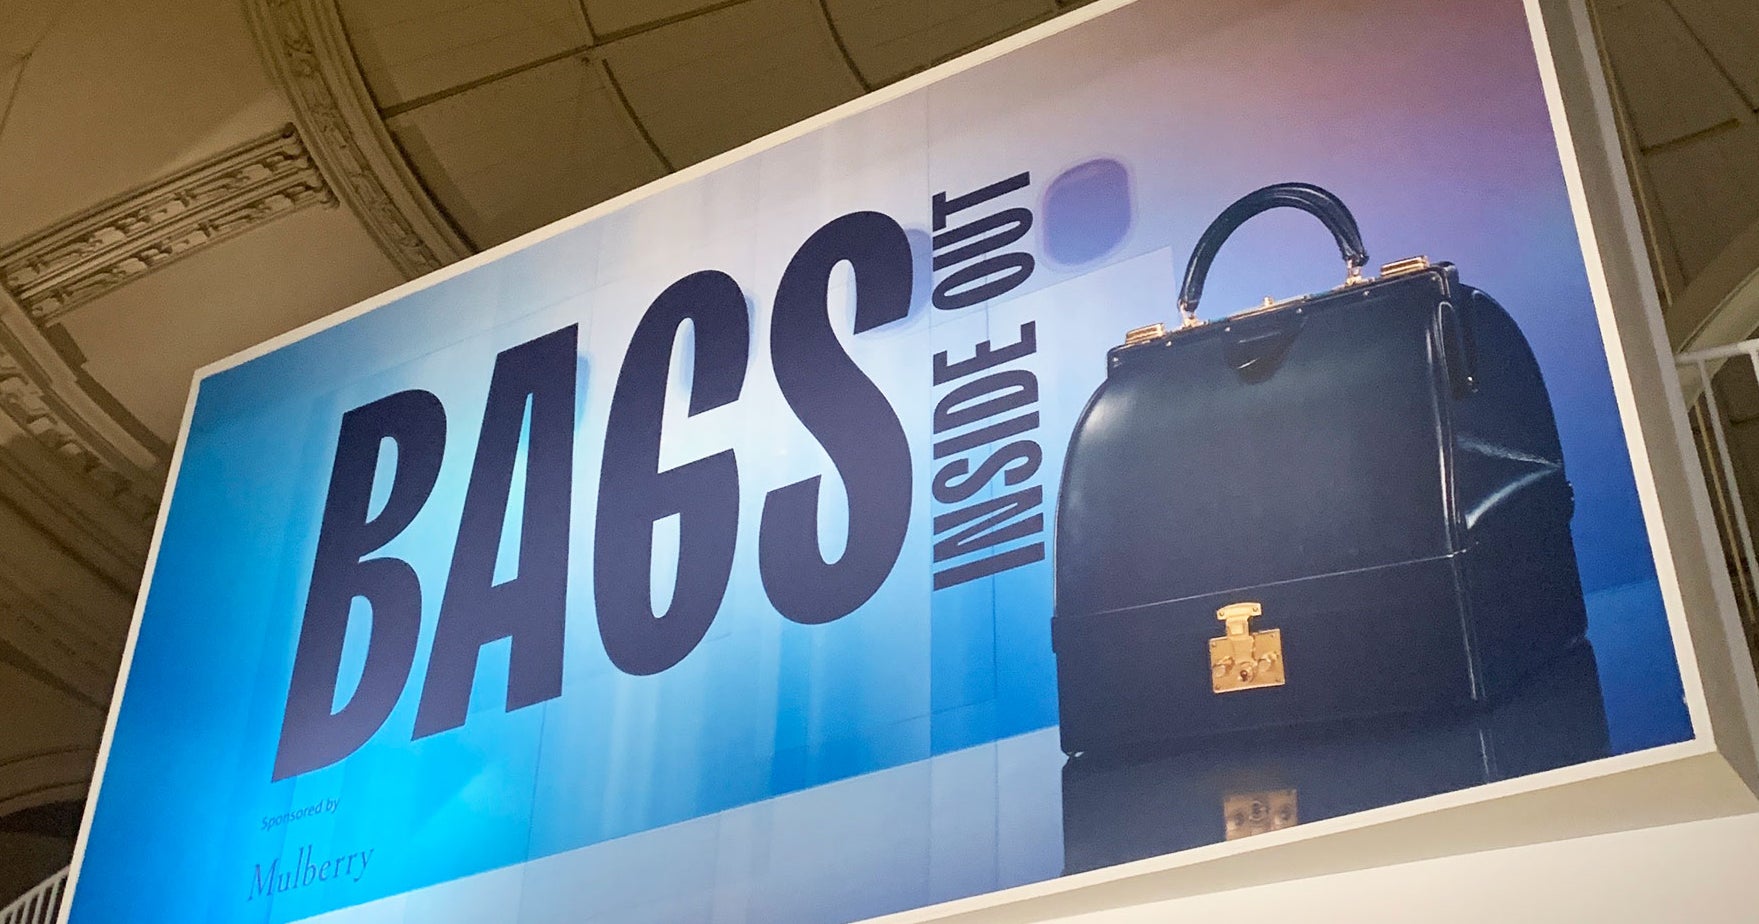 The V&A Museum's New Bags: Inside Out Exhibition